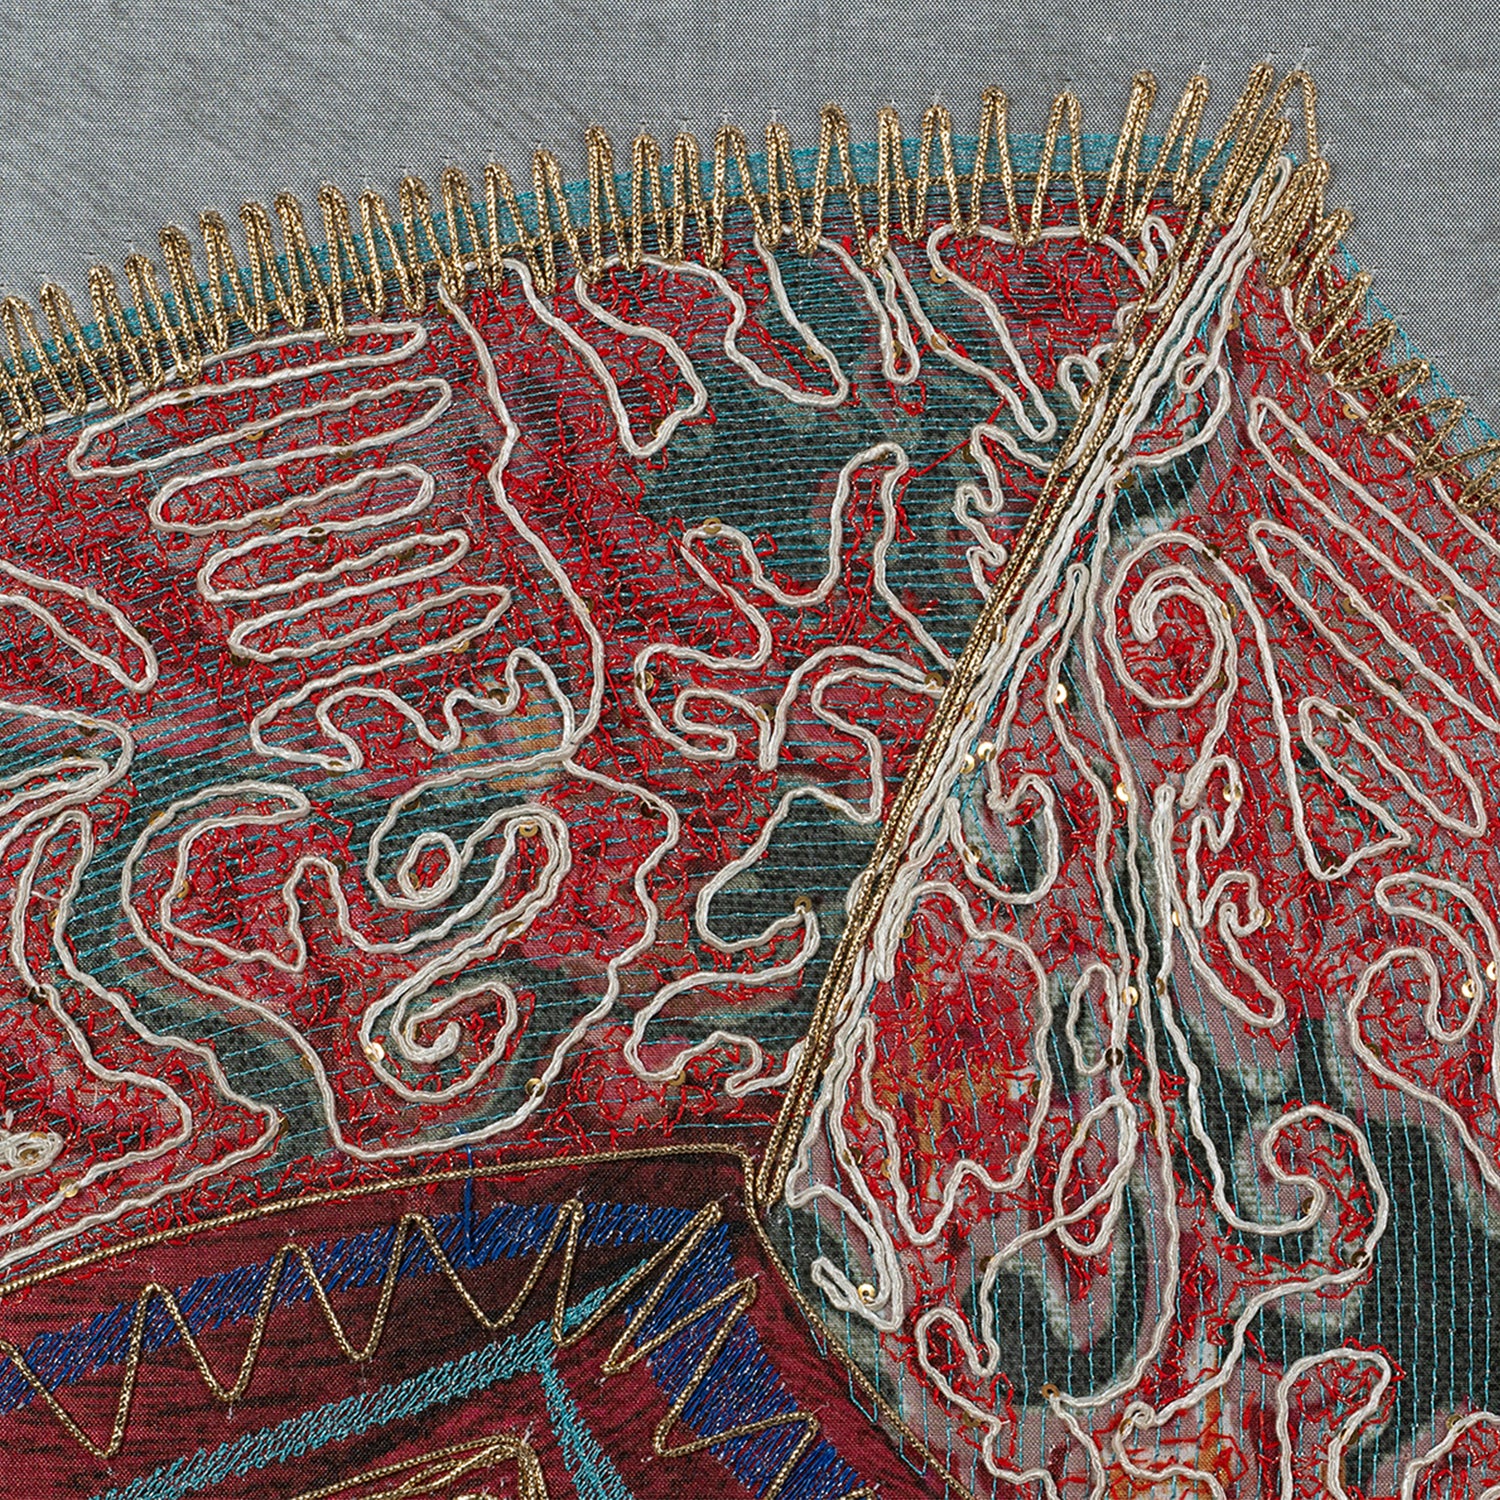 The details of Horsetail-based embroidery by hand.